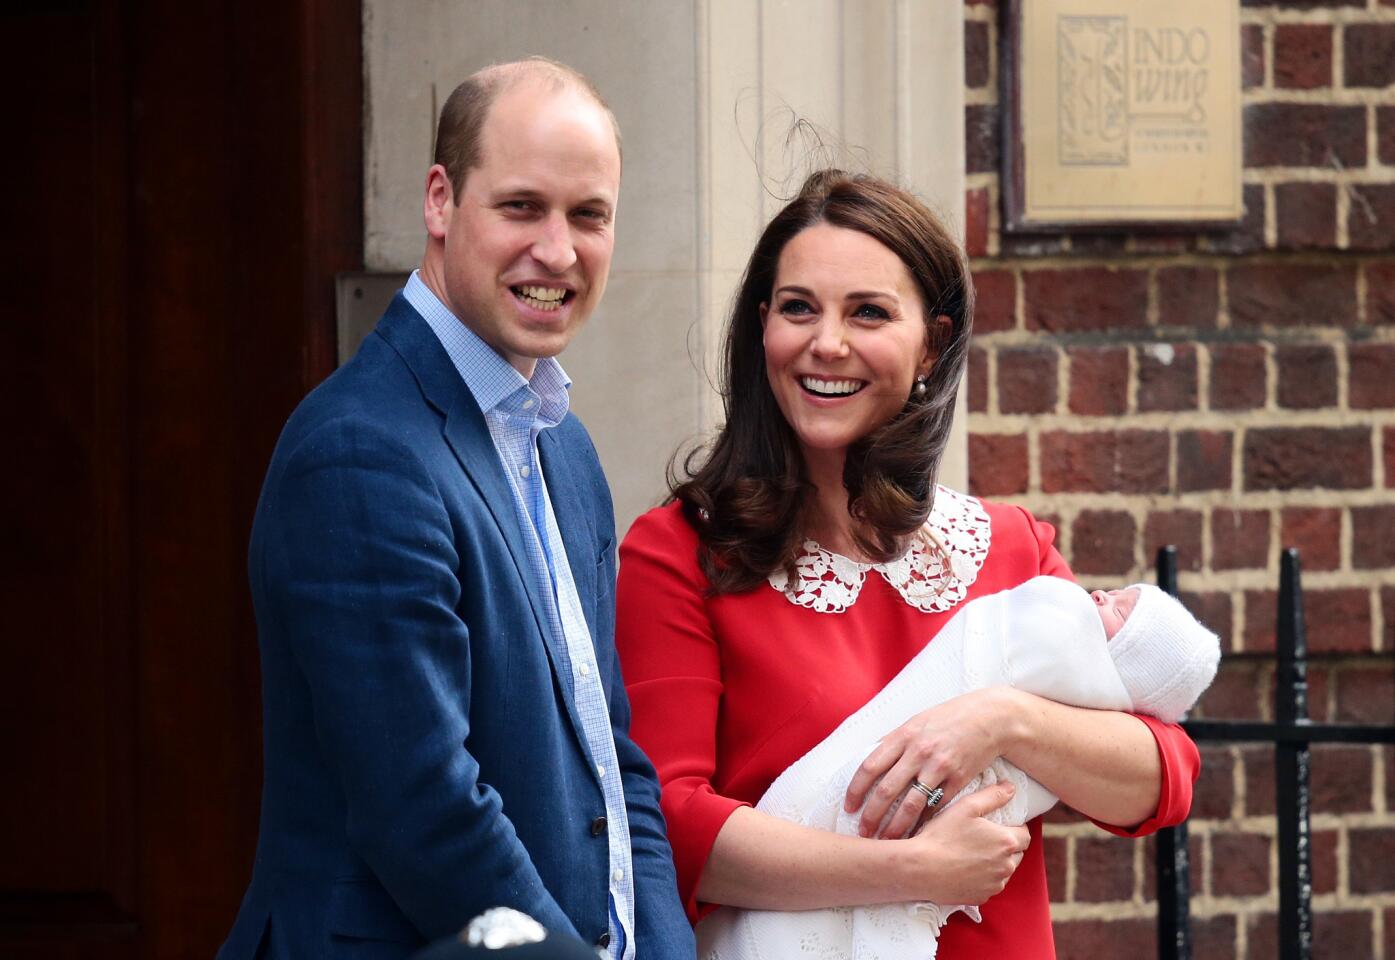 Prince William, Duke of Cambridge and Catherine, Duchess of Cambridge, pose for photographers with their newborn baby boy outside the Lindo Wing of St Mary's Hospital on April 23, 2018 in London, England.